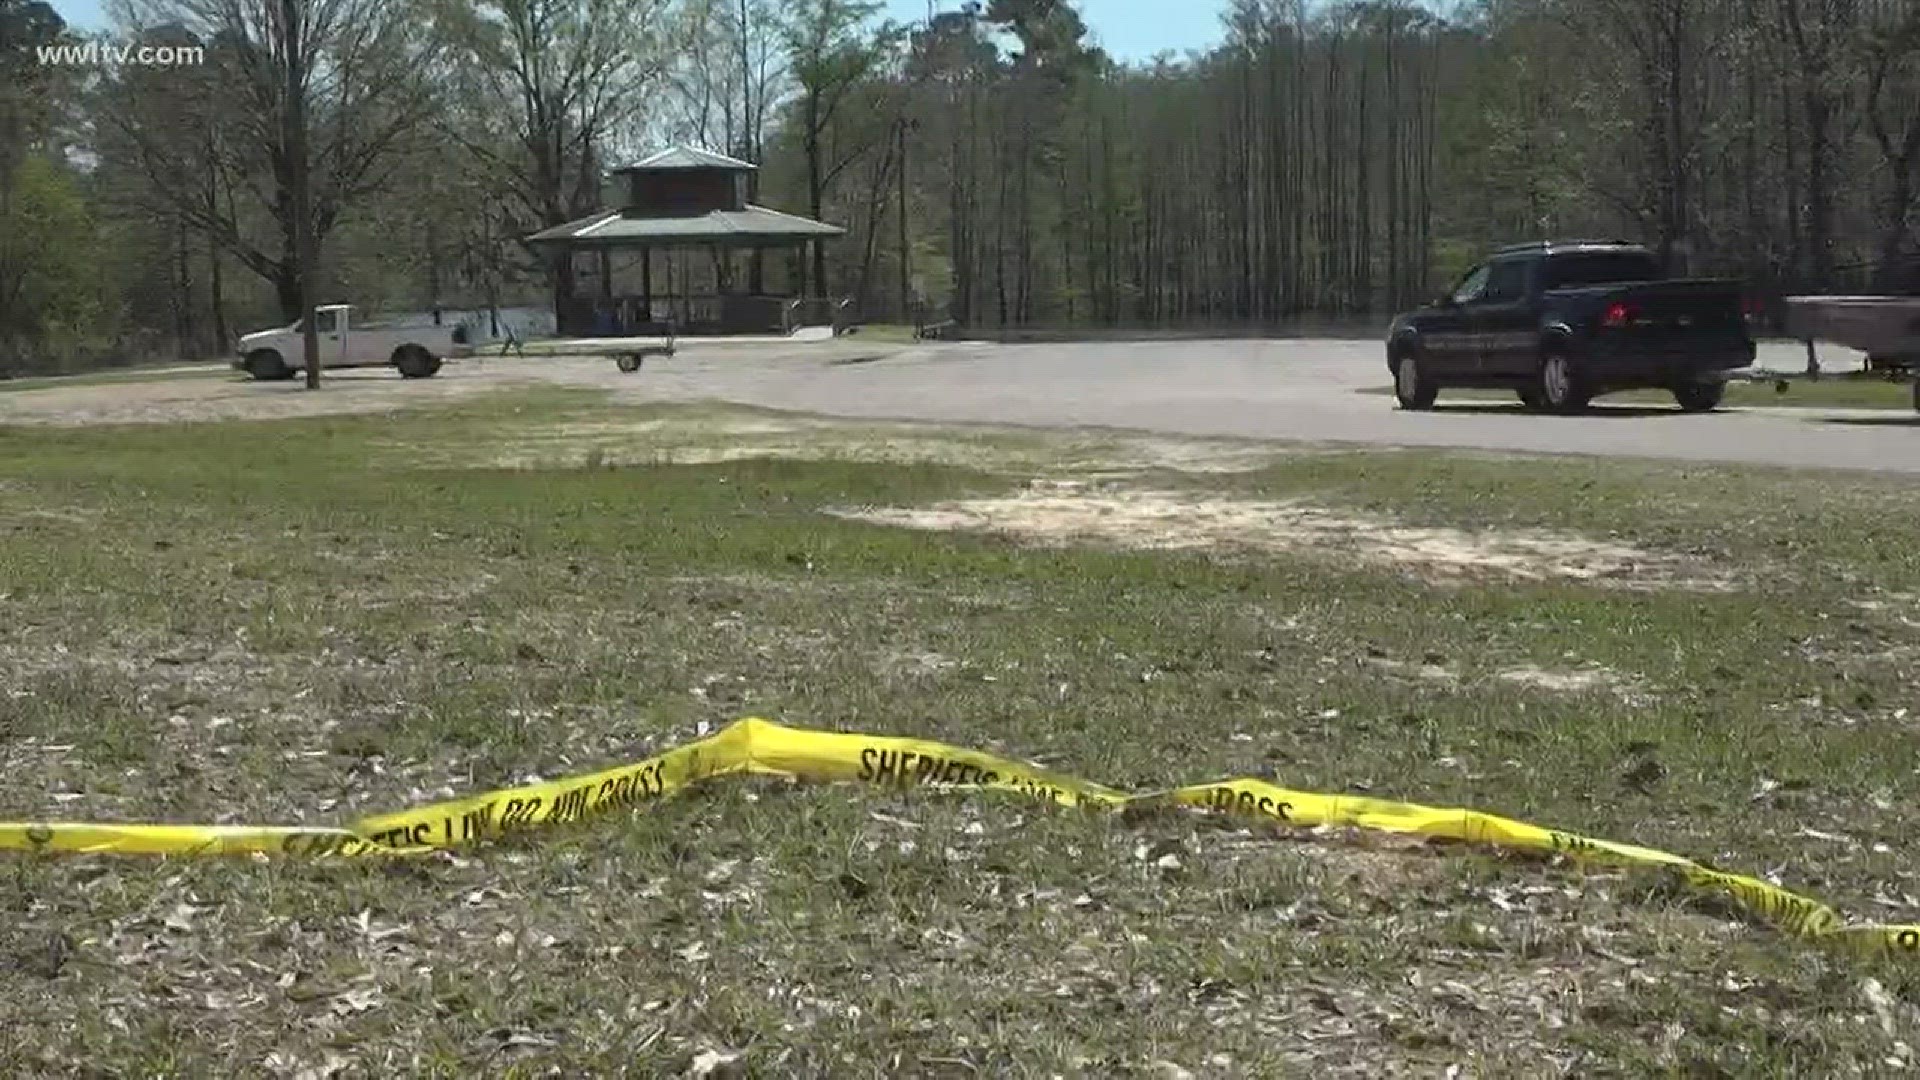 According to Louisiana State Police, the shooting happened after 3:30 a.m. Friday at a boat launch on Poole's Bluff Road in Bogalusa. The Washington Parish Sheriff's Office was called to investigate a suspicious person on a motorcycle.